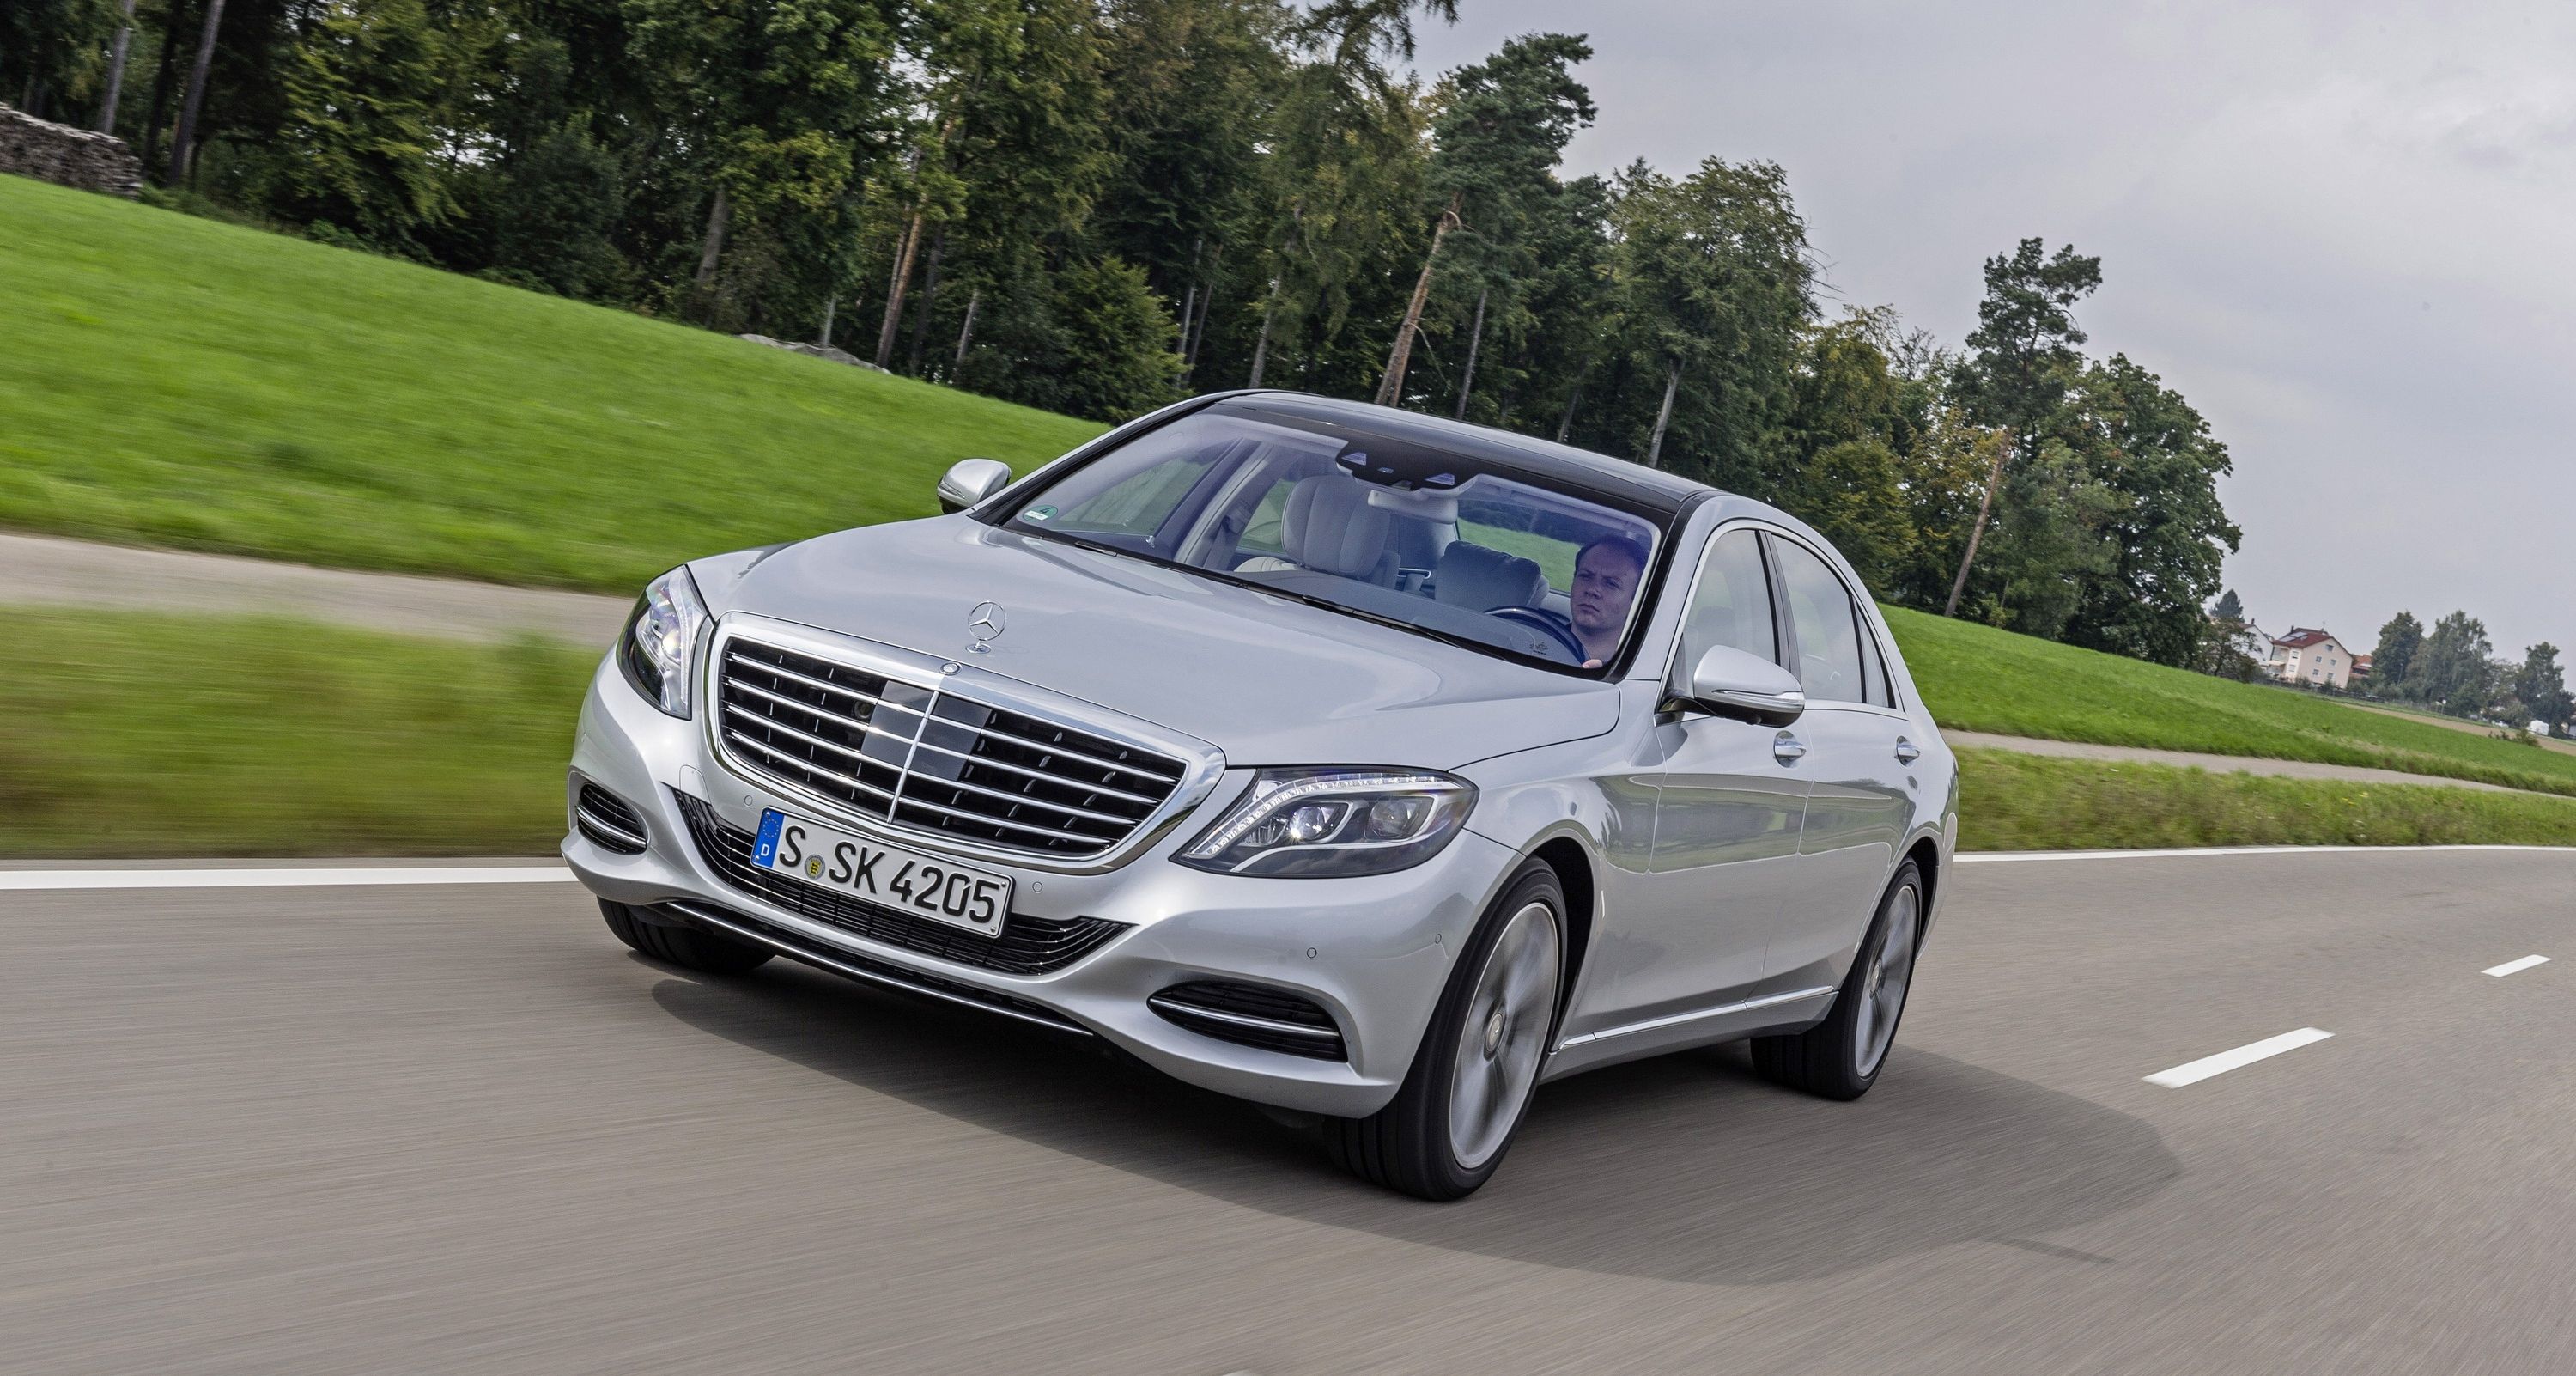  The perfect compromise for rich nerds, the Mercedes-Benz S550 Plug-In Hybrid